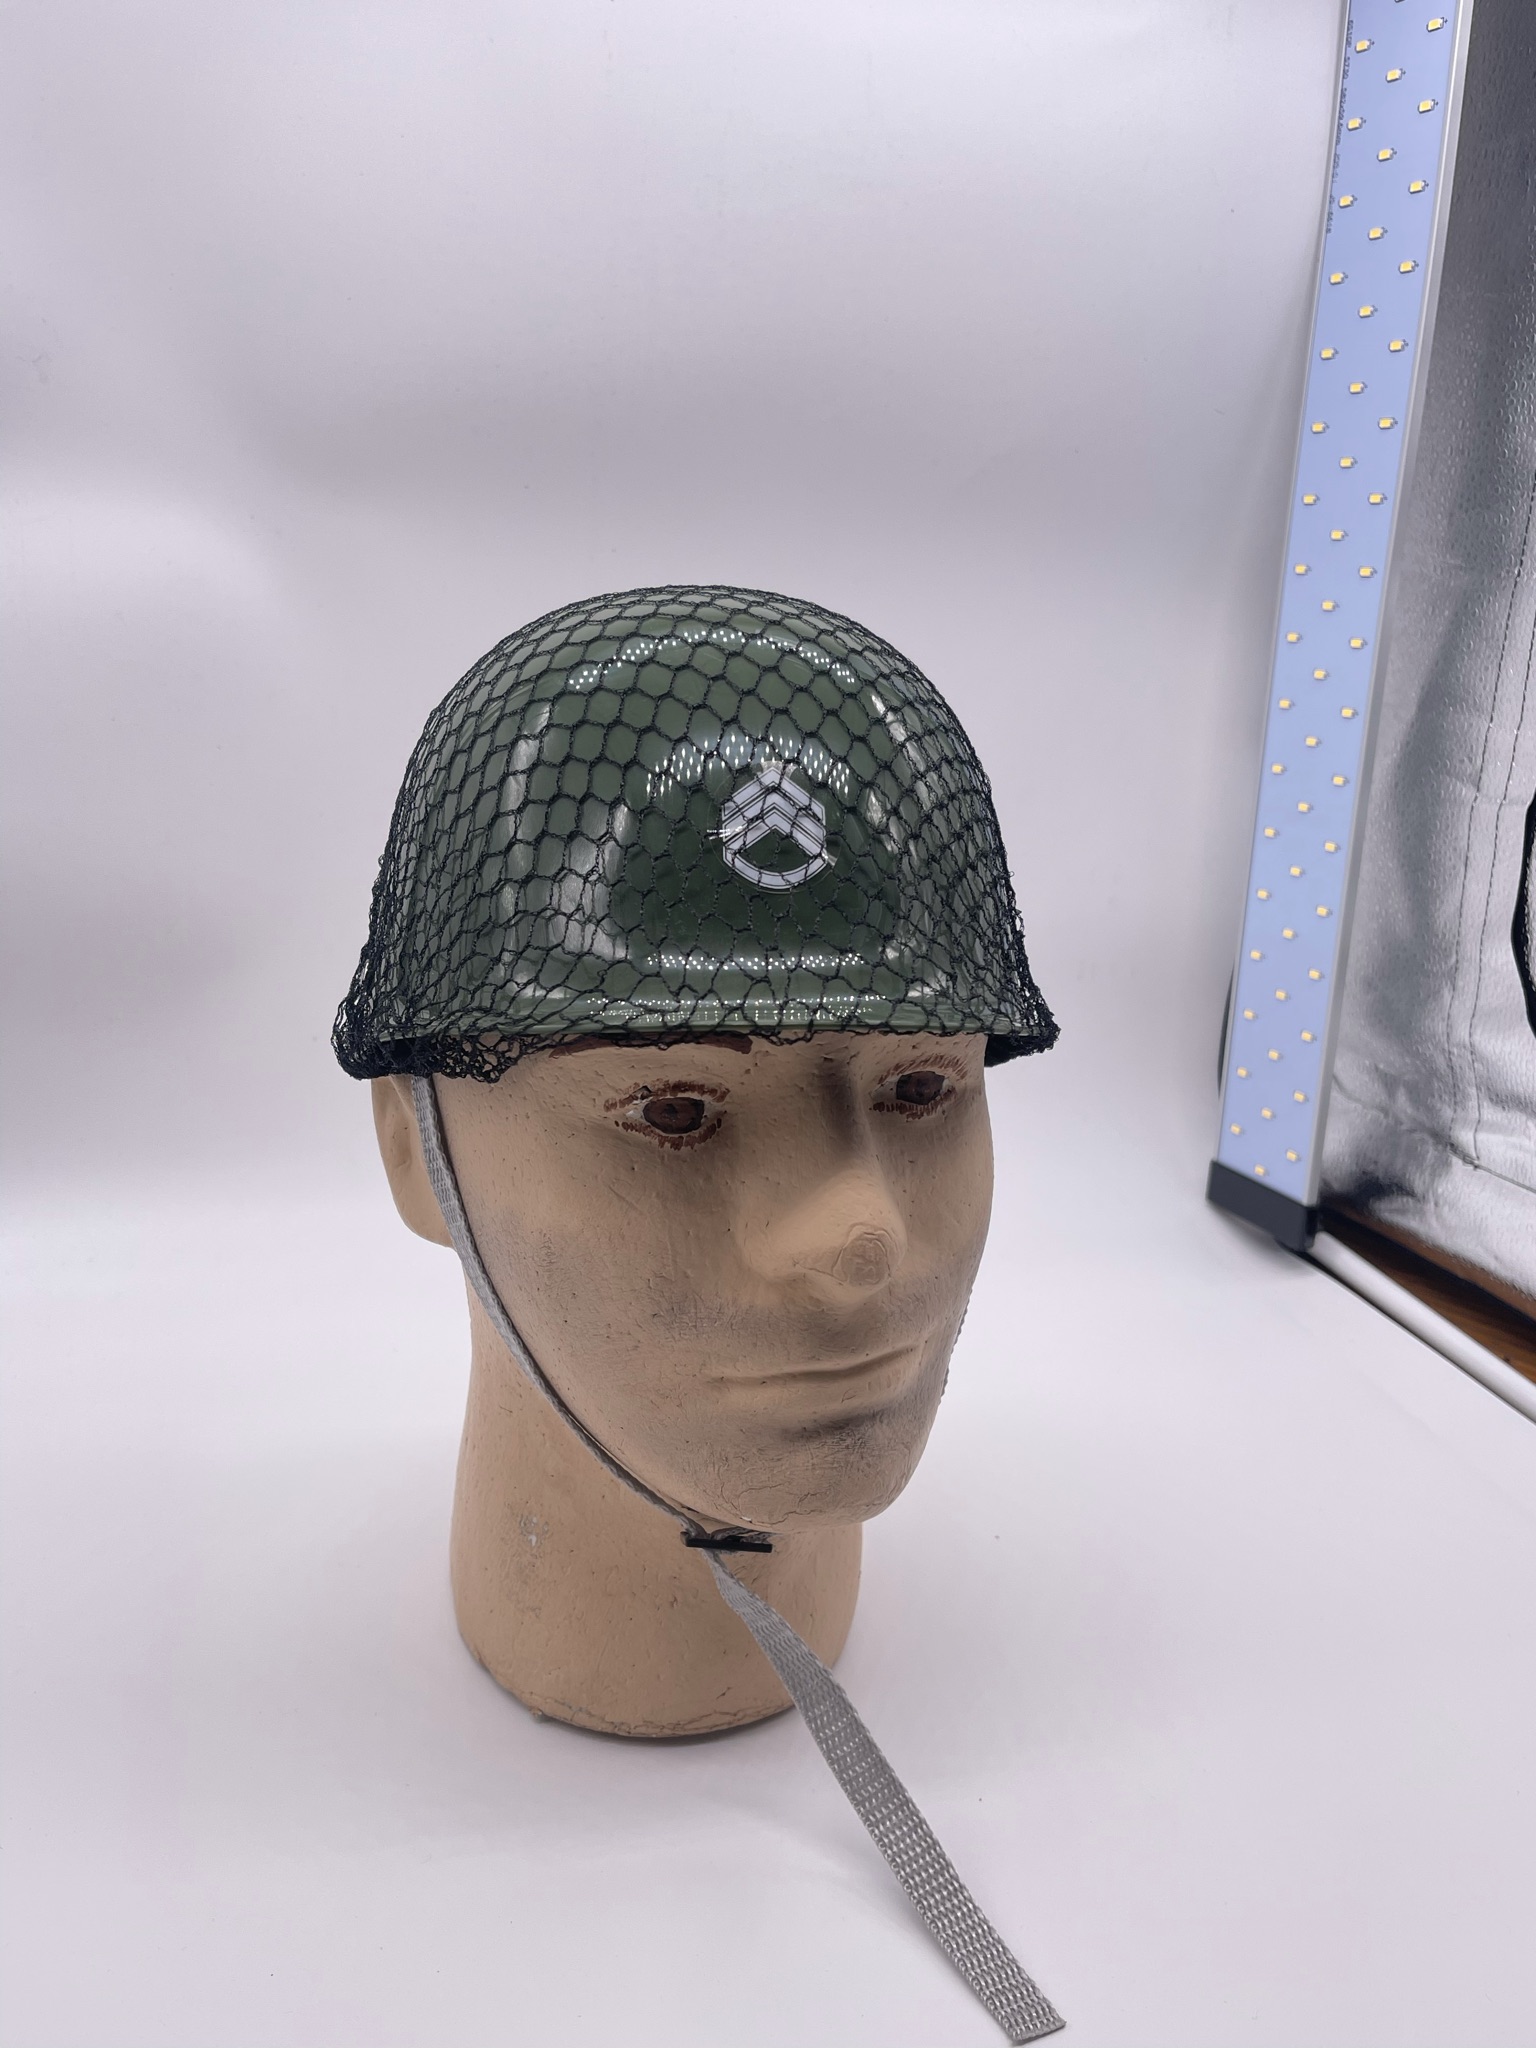 Featured image for “Helmet, ARMY”